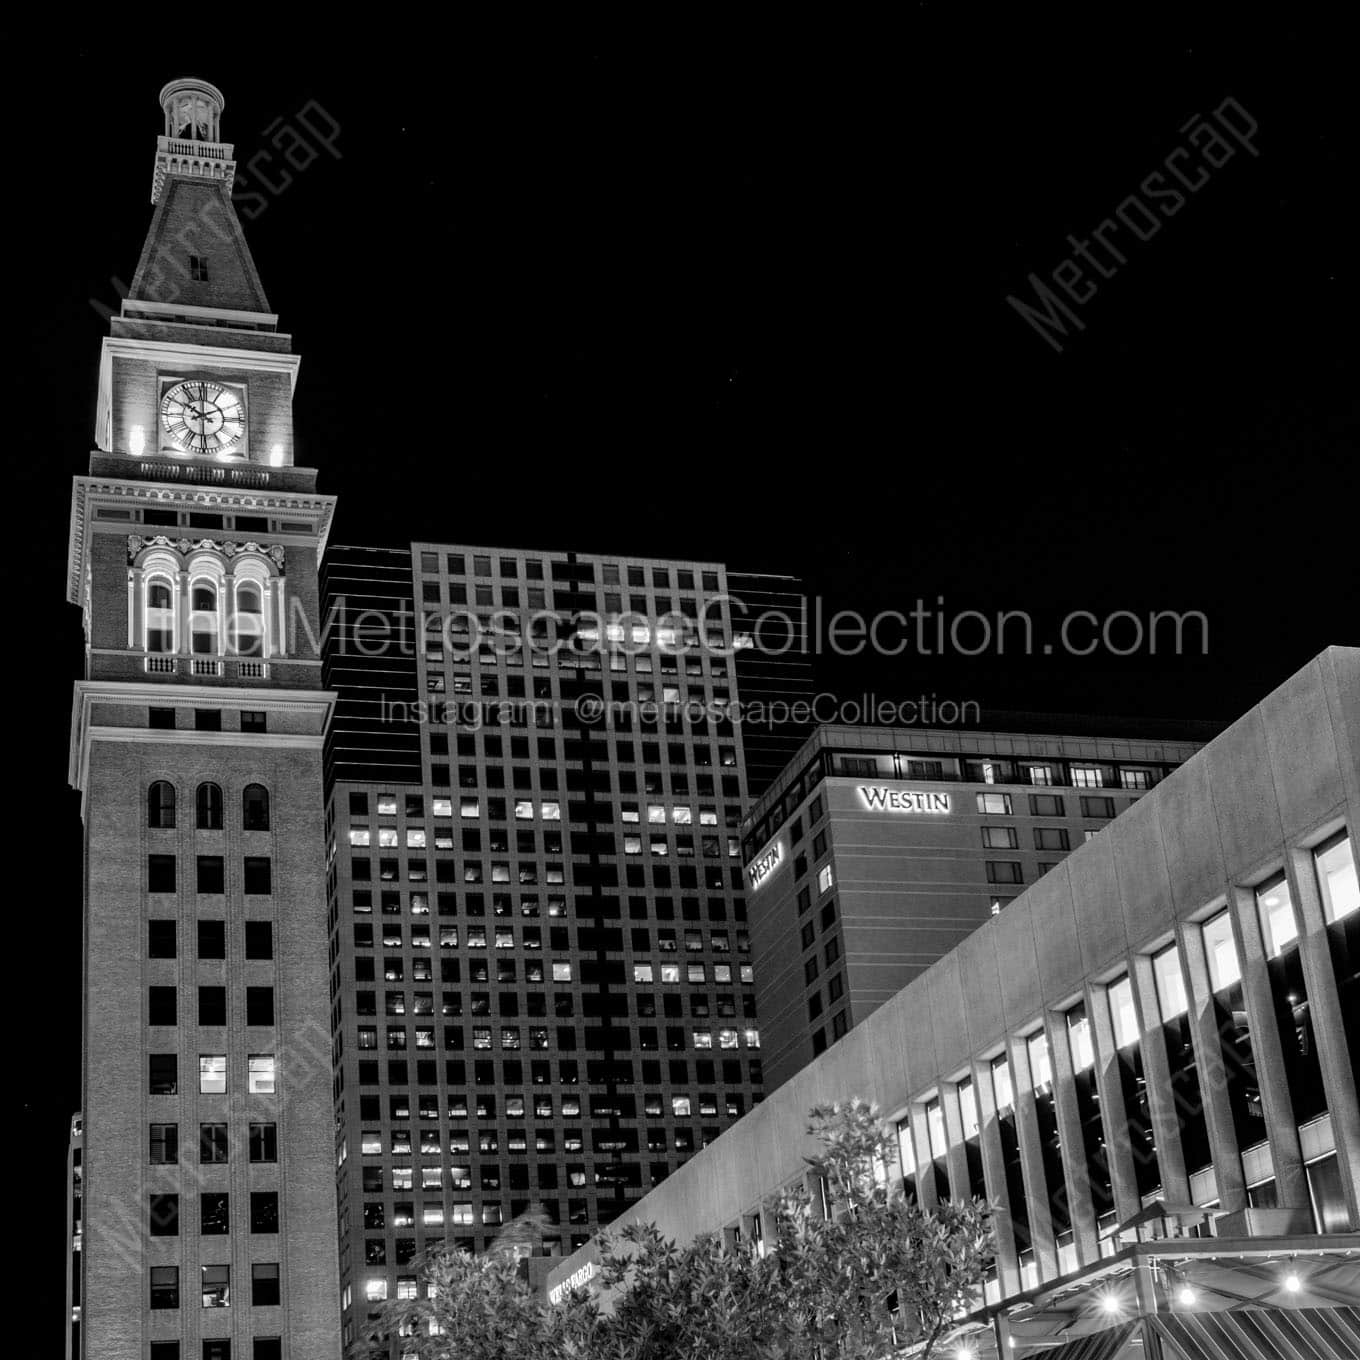 daniels and fisher building at night Black & White Wall Art